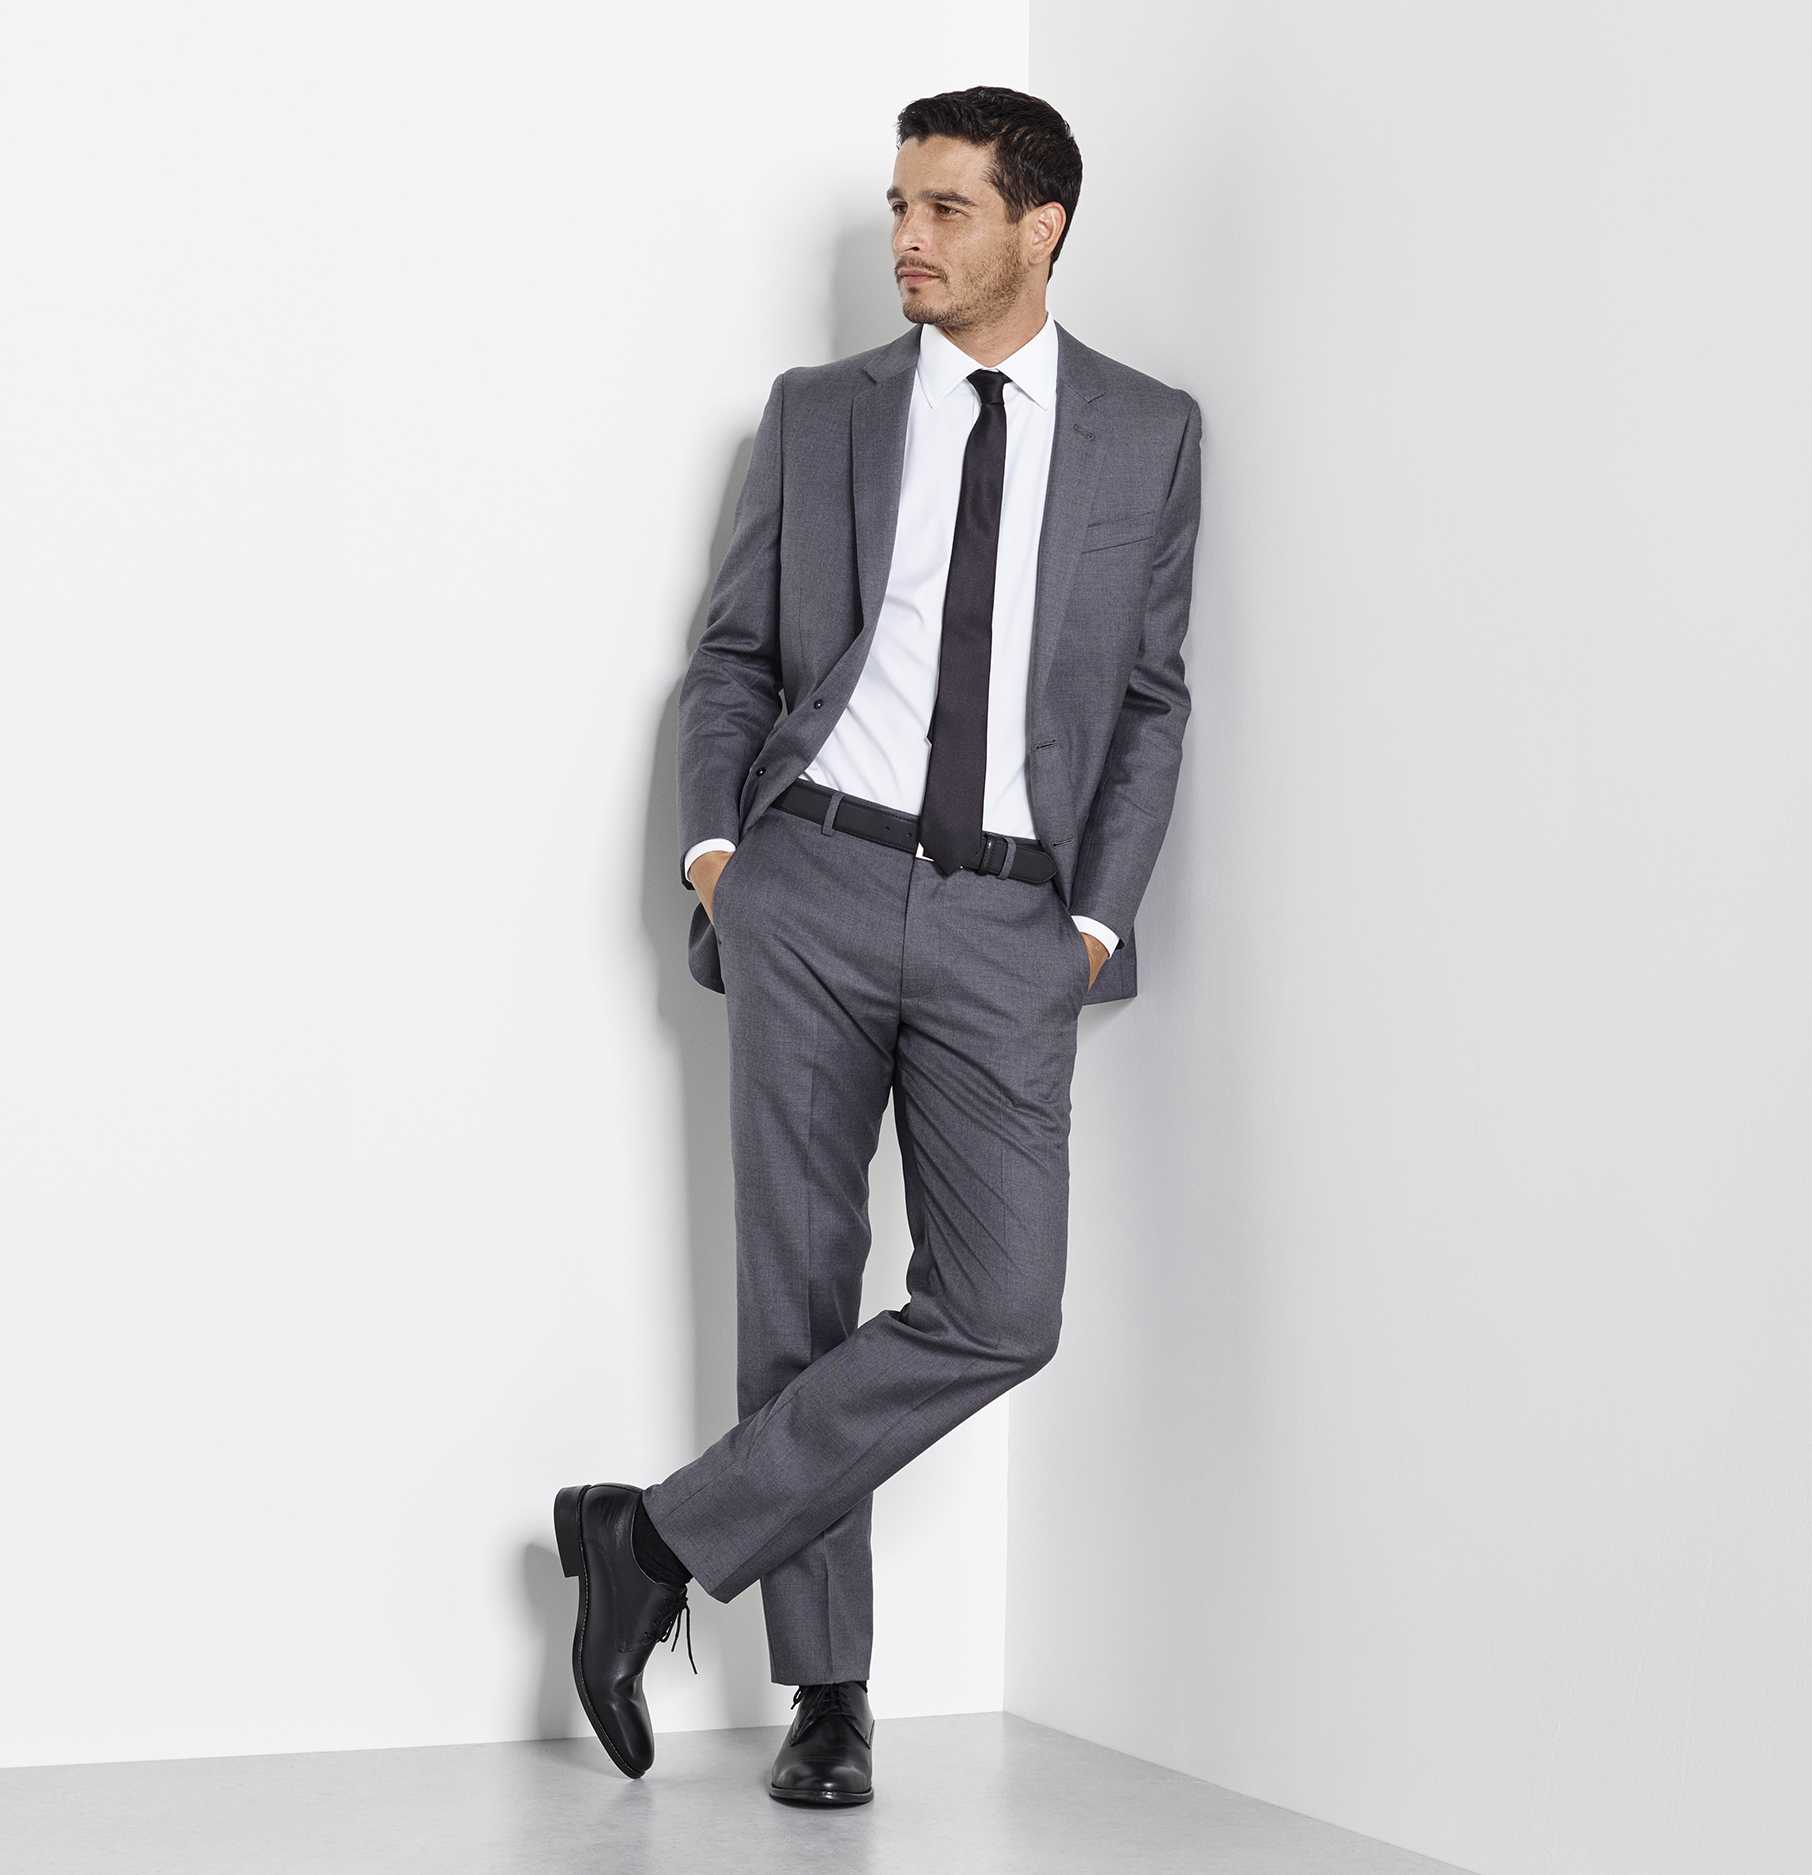 The grey suit: right suit for an interview - AcetShirt